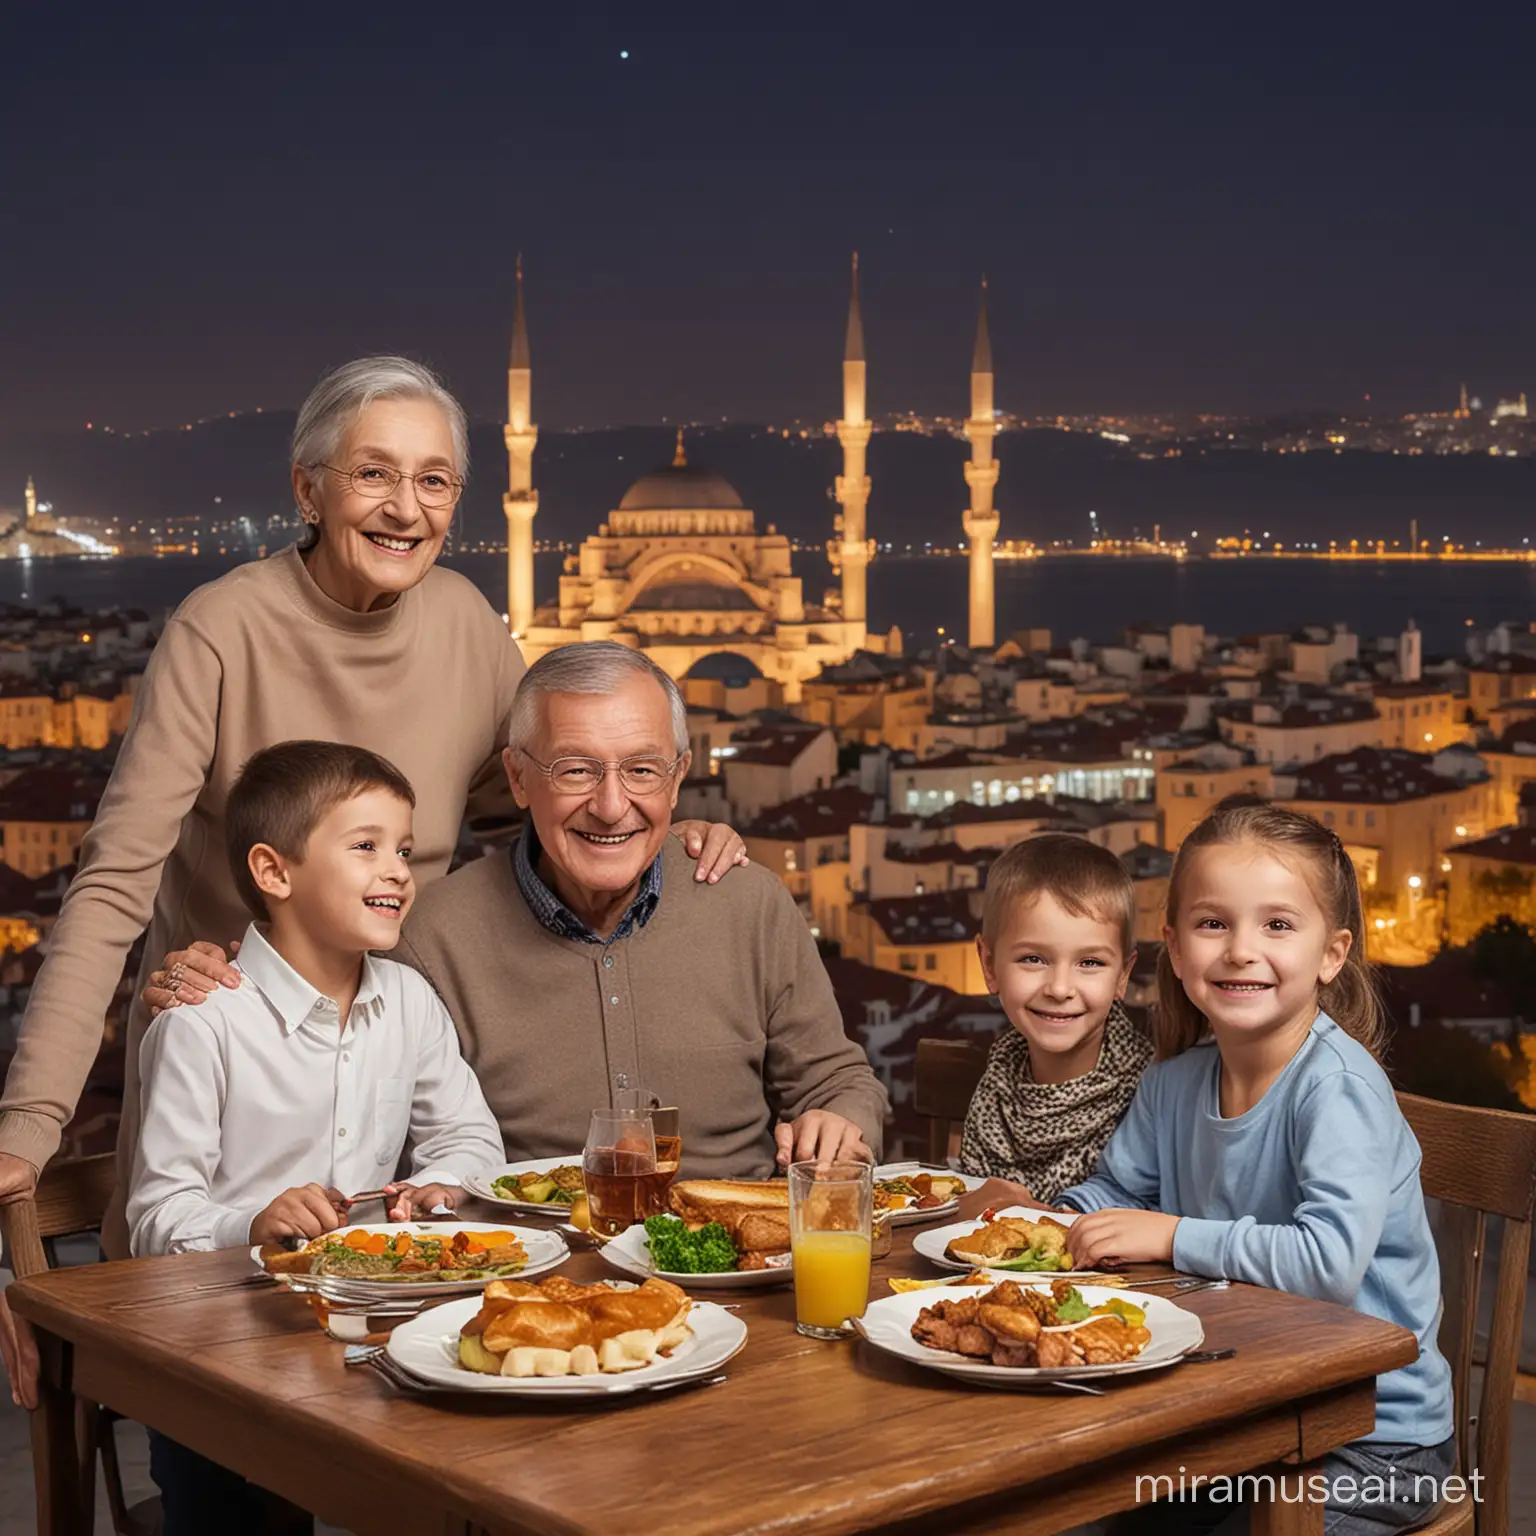 happy grandparent with kids, night istanbul background, dinner table